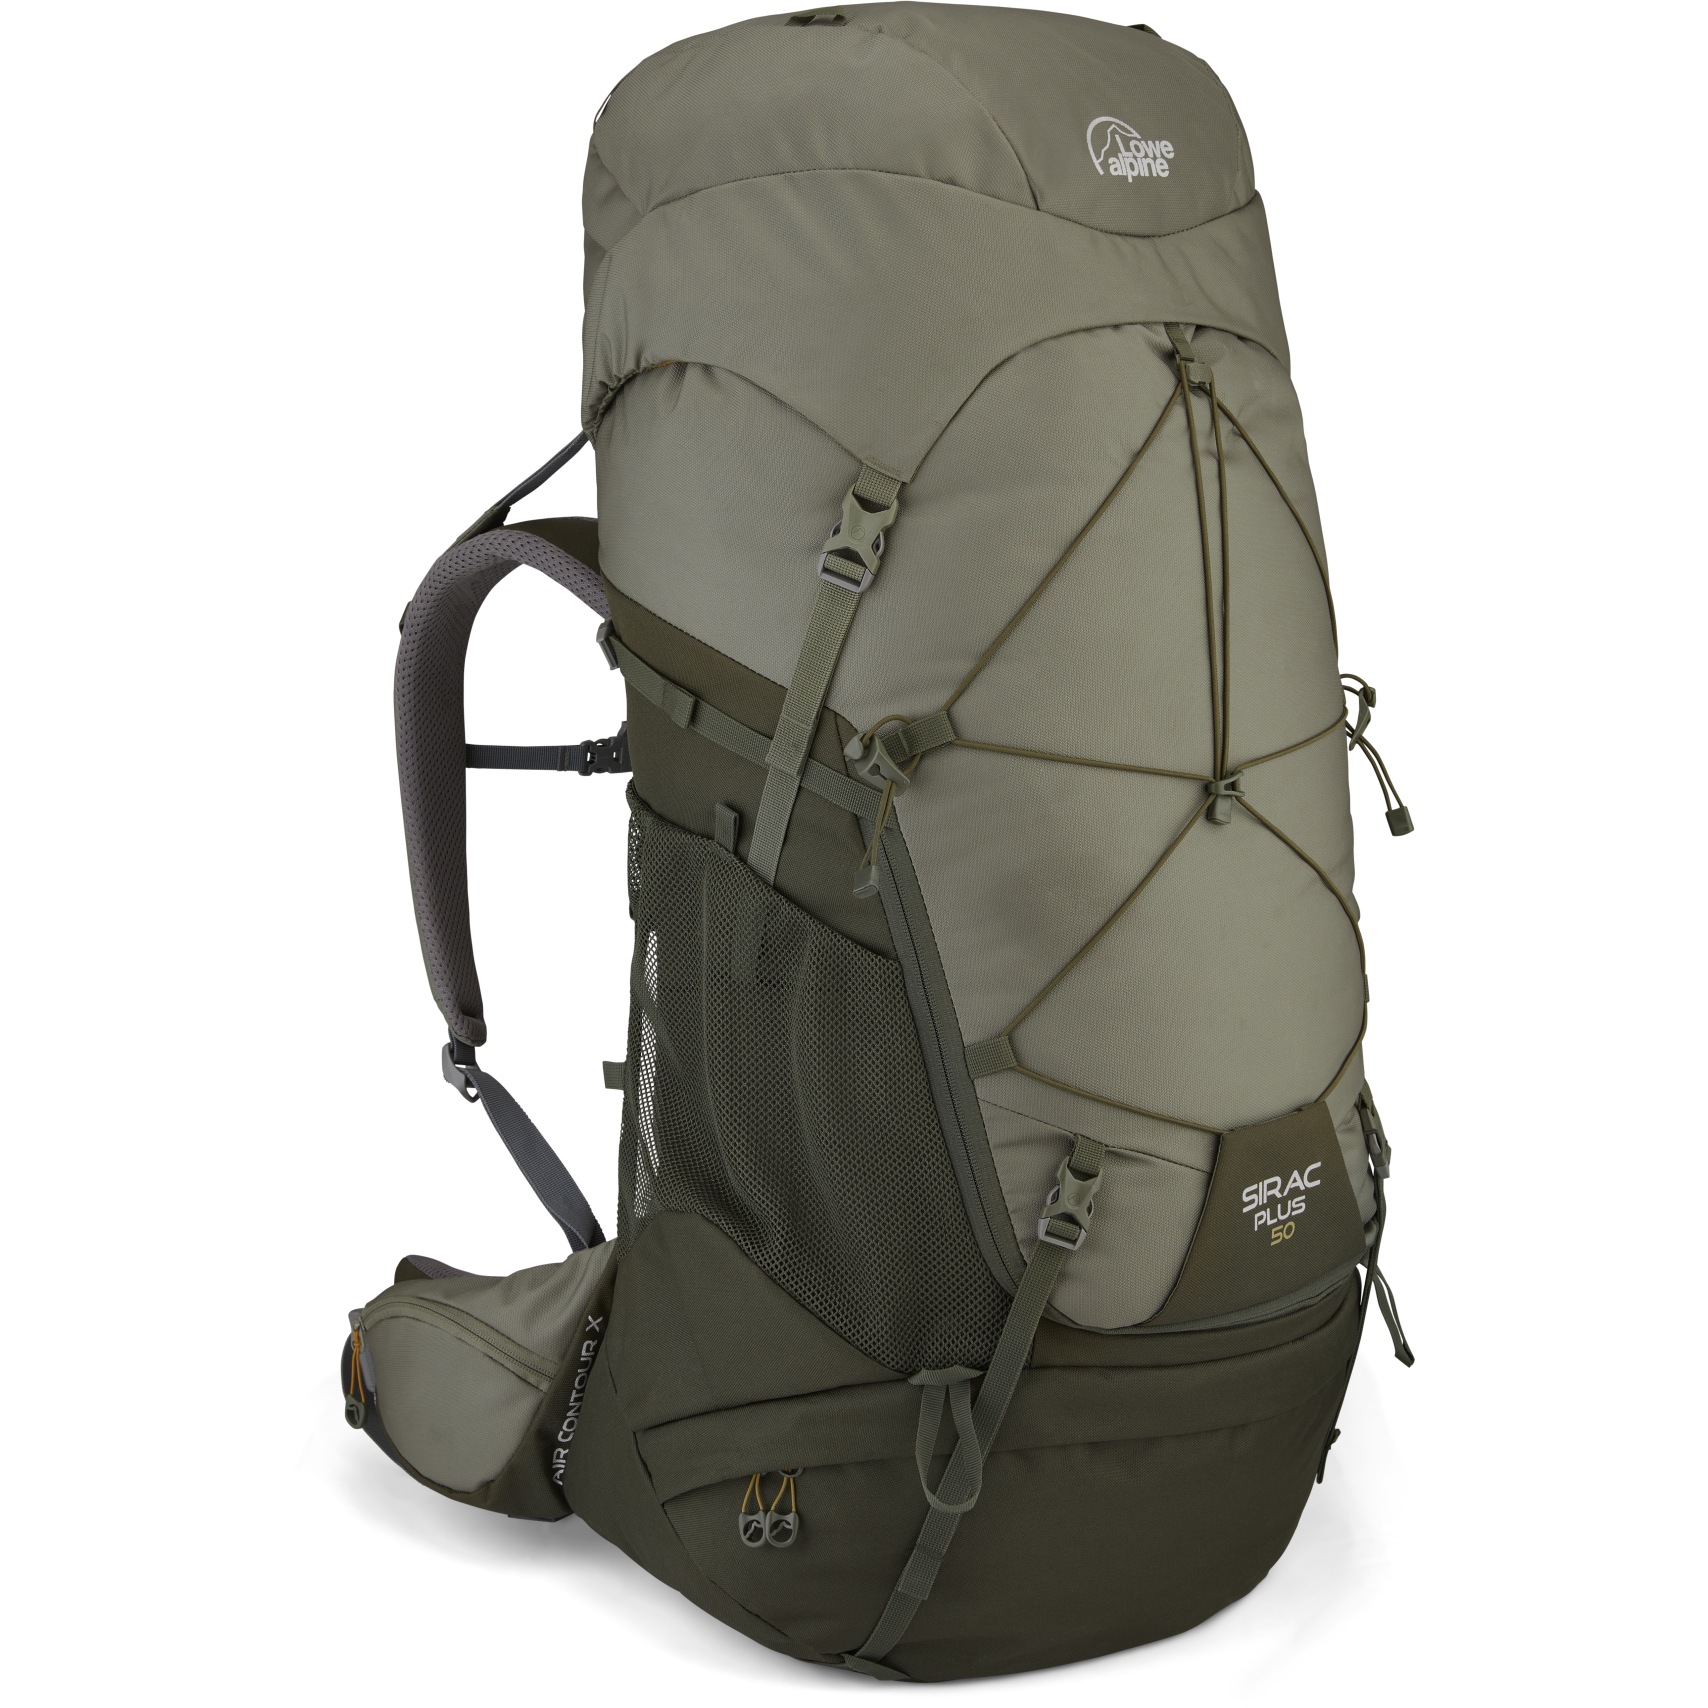 Picture of Lowe Alpine Sirac Plus 50L Backpack - M/L - Light Khaki/Army